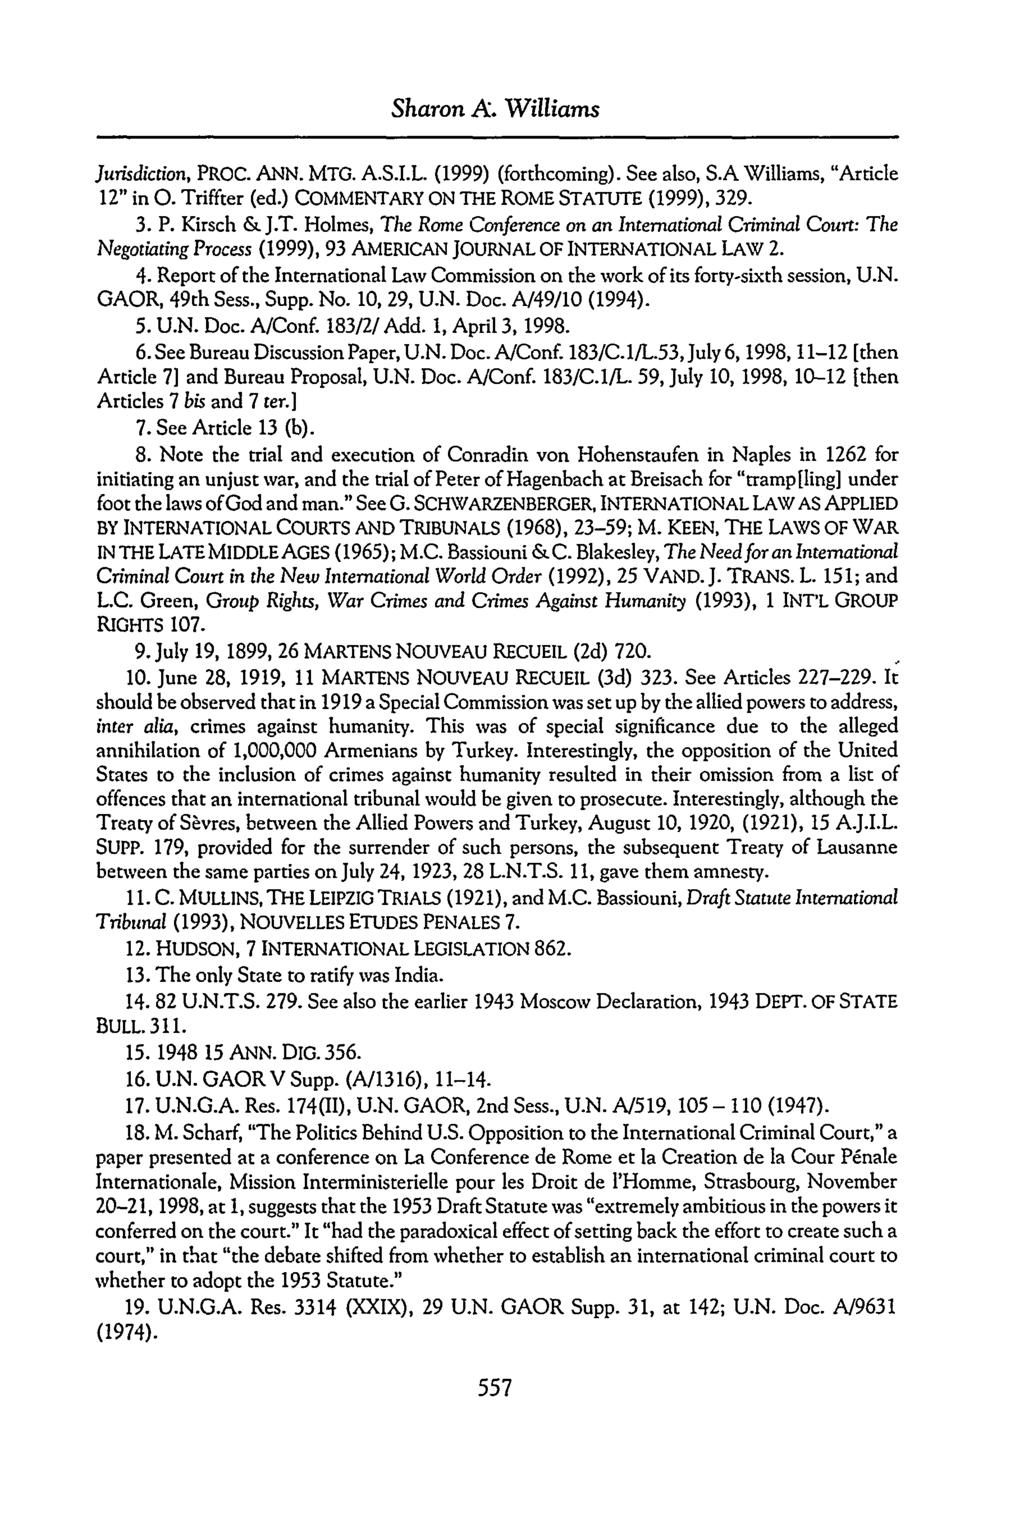 Sharon A. Williams Jurisdiction, PROC. ANN. MTG. A.S.I.L. (1999) (forthcoming). See also, S.A Williams, "Article 12" in 0. Triffter (ed.) COMMENTARY ON THE ROME STATUTE (1999), 329. 3. P. Kirsch & J.